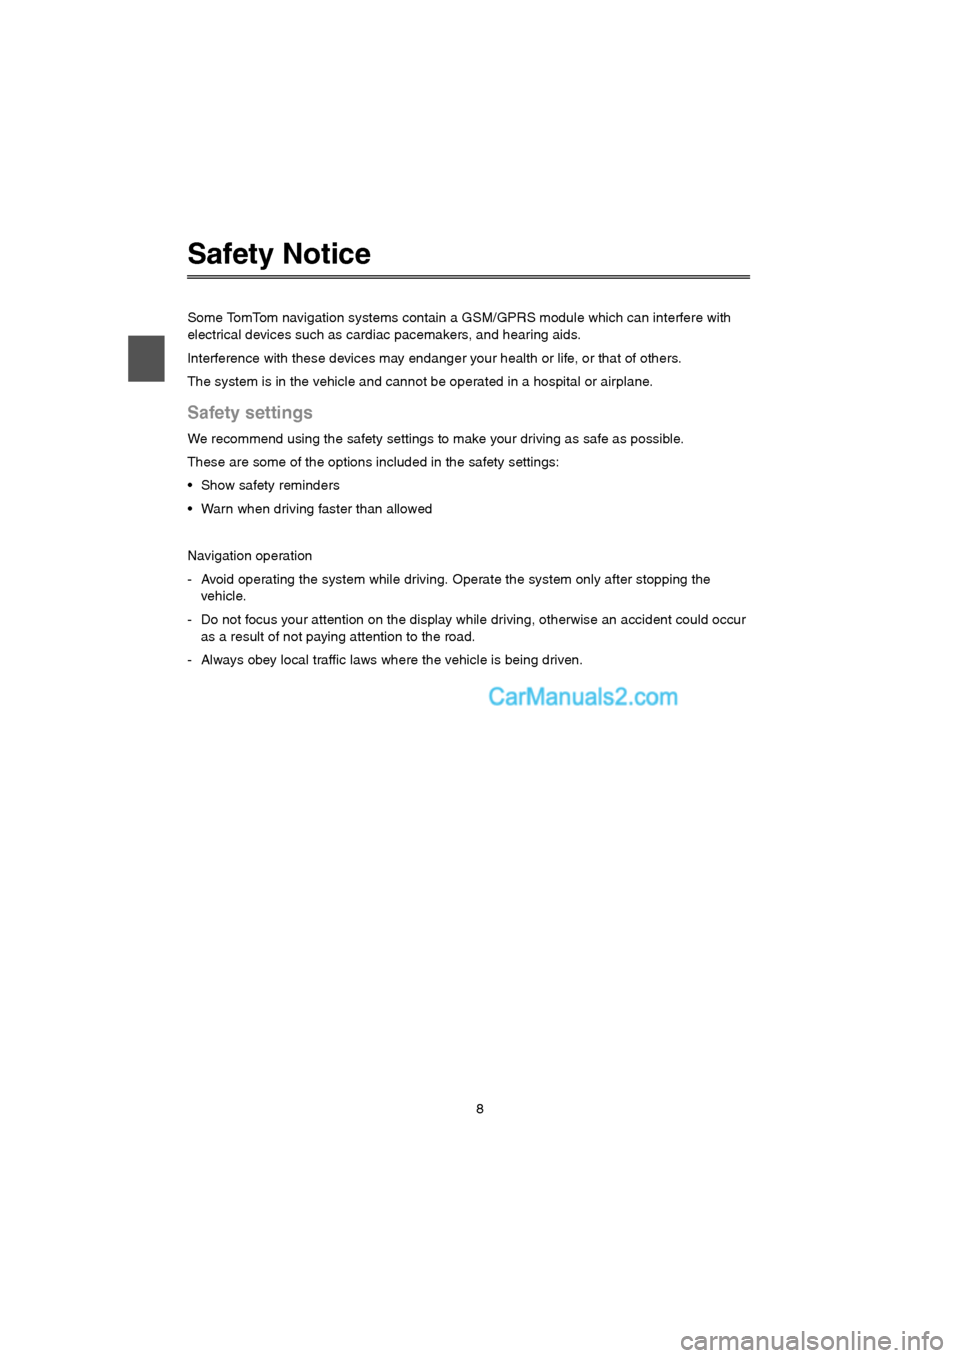 MAZDA MODEL CX-9 2015  Navigation Manual (in English) 8
Safety Notice
Some TomTom navigation systems contain a GSM/GPRS module which can interfere with 
electrical devices such as cardiac pacemakers, and hearing aids.
Interference with these devices may 